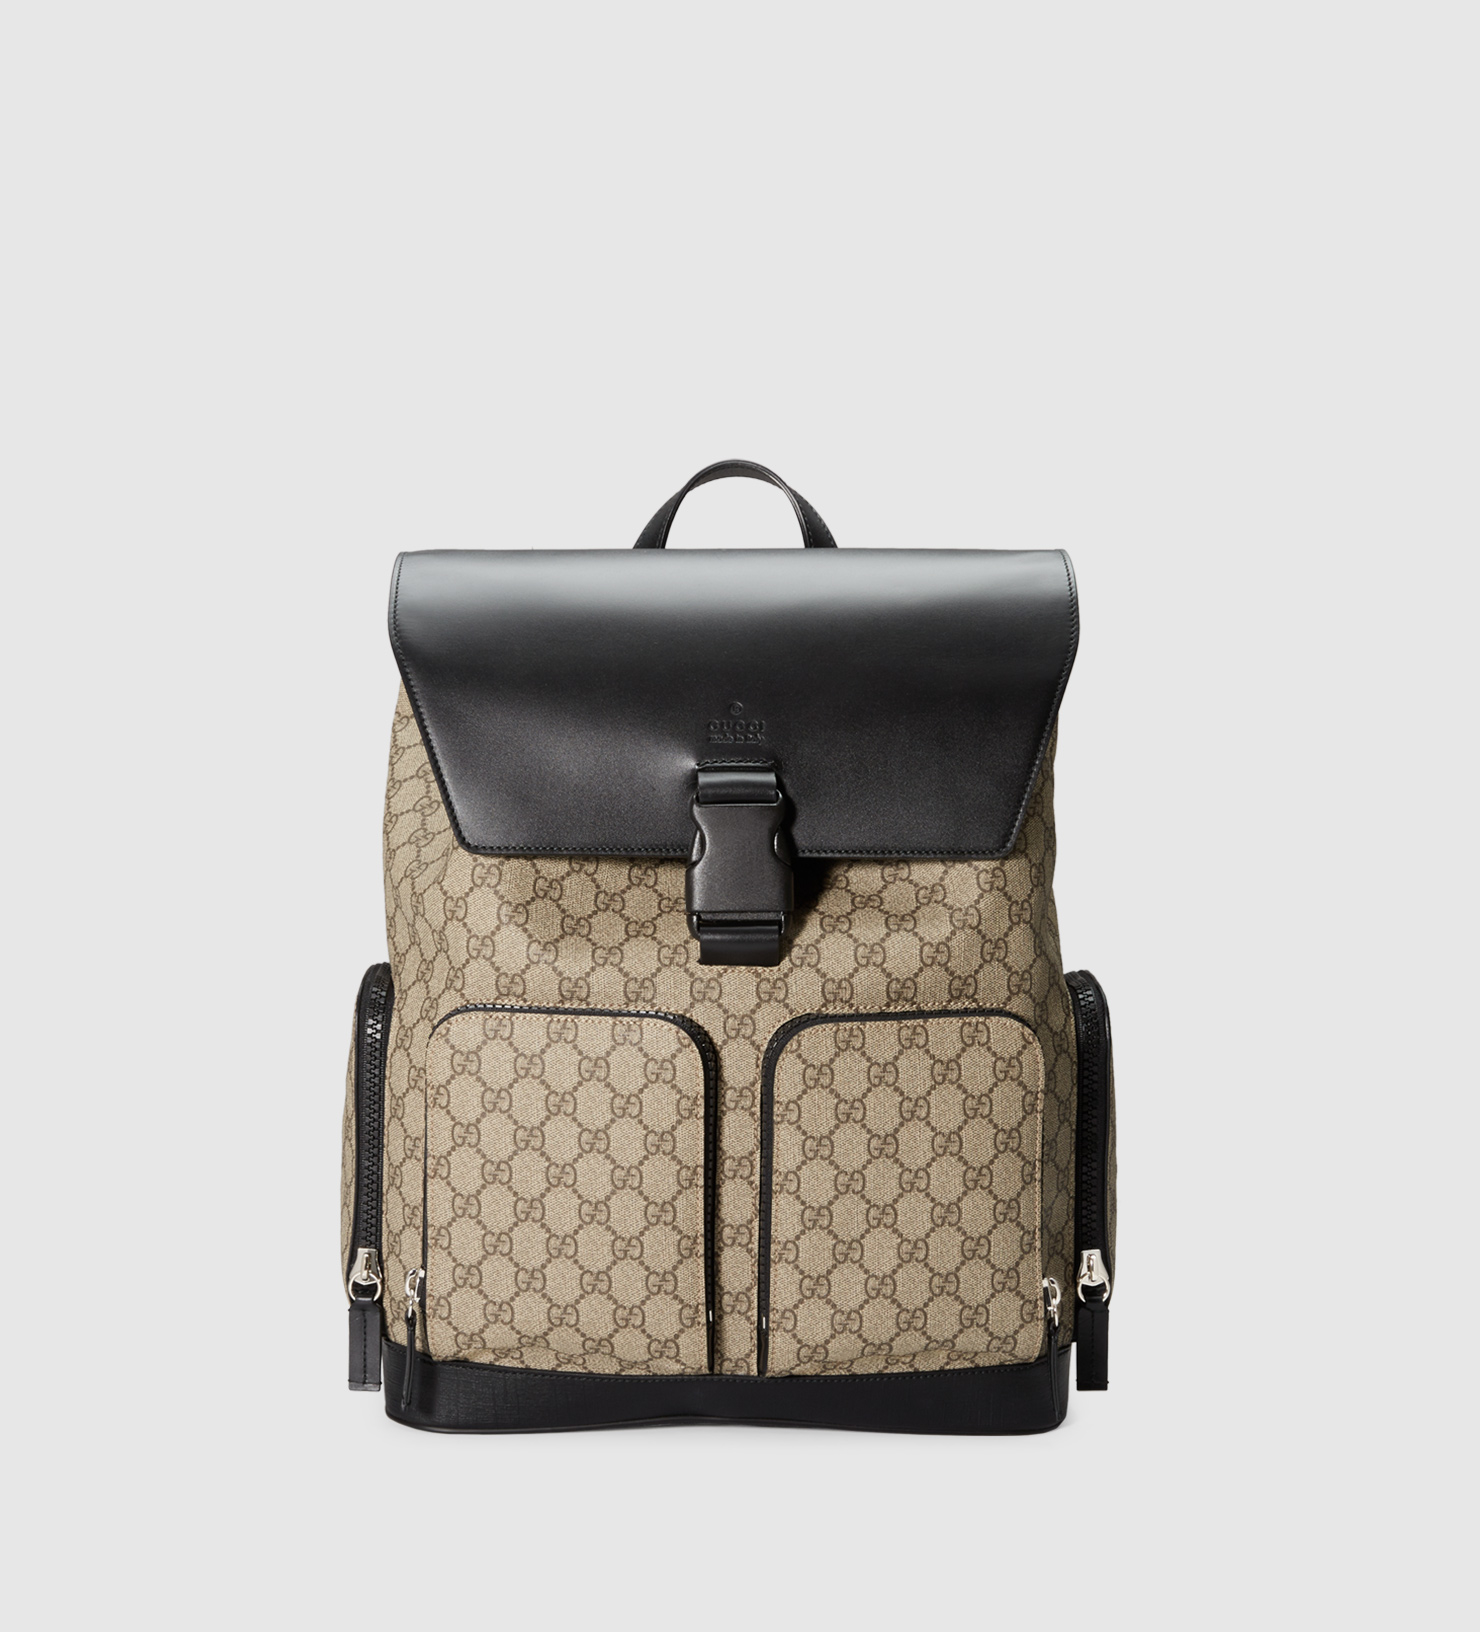 Gucci Canvas Gg Supreme Backpack in Natural for Men - Lyst